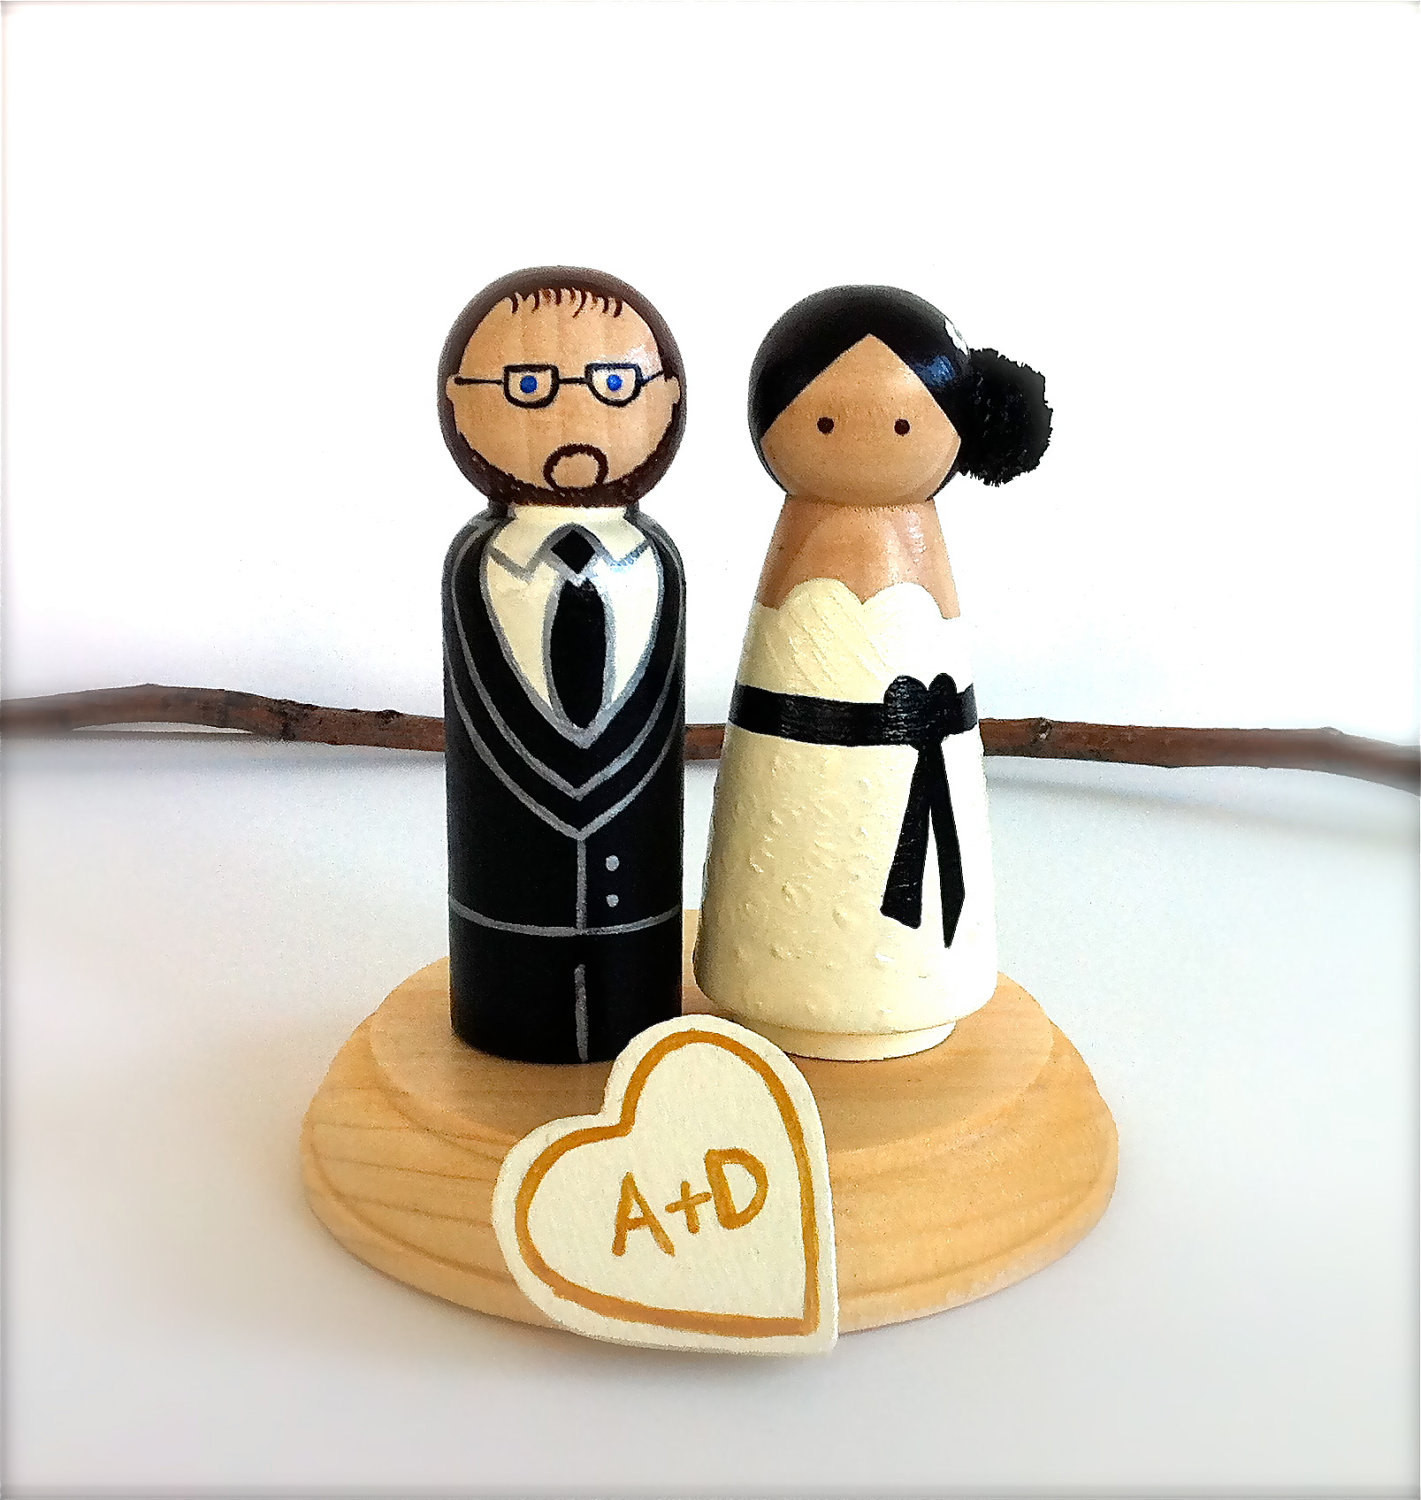 Custom Made Wedding Cake Toppers
 Custom Wedding Cake Toppers Bride and by CreativeButterflyXOX